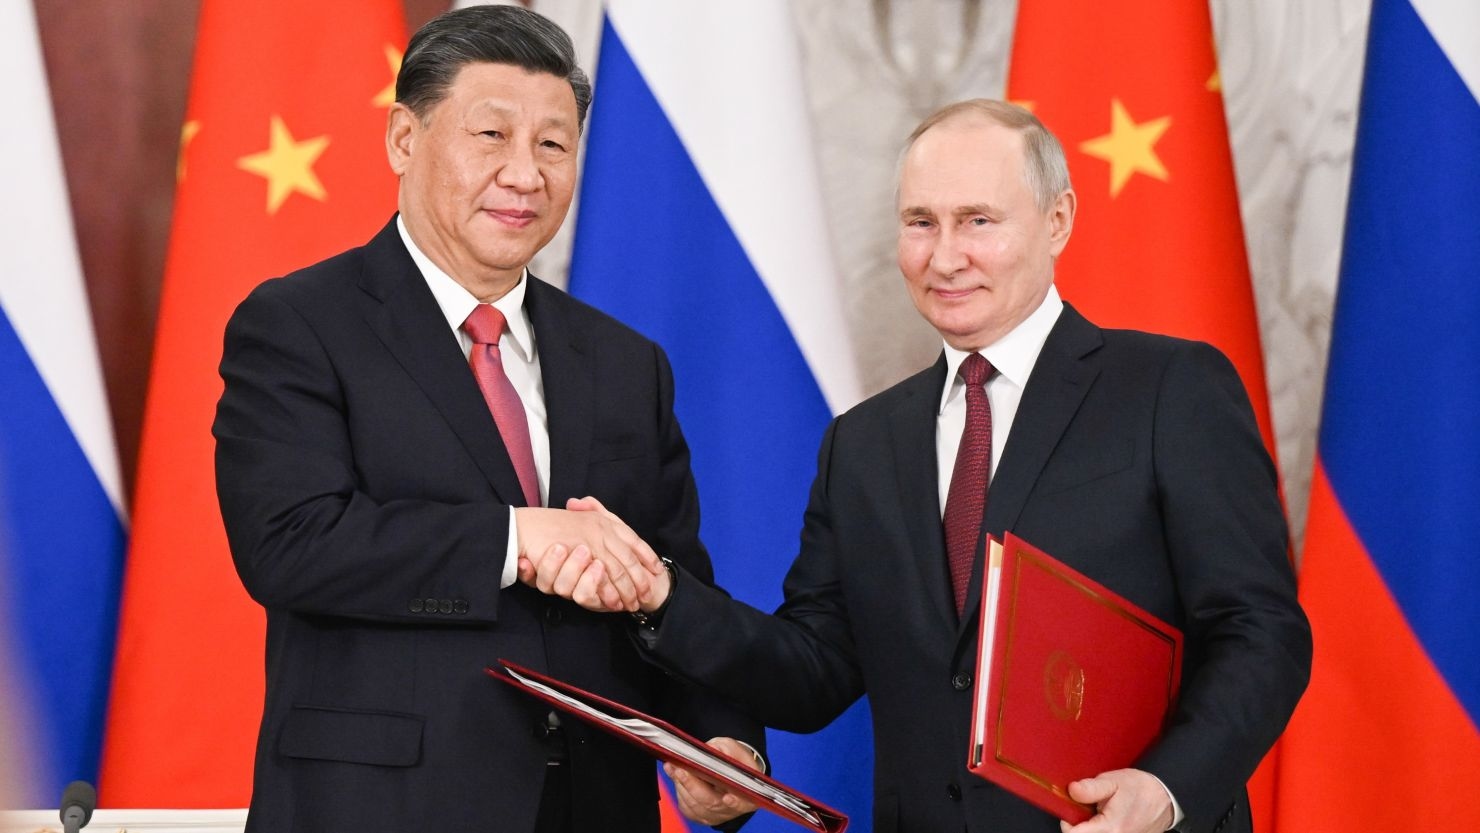 China and Russia criticize Israel as divisions with the West sharpen | CNN